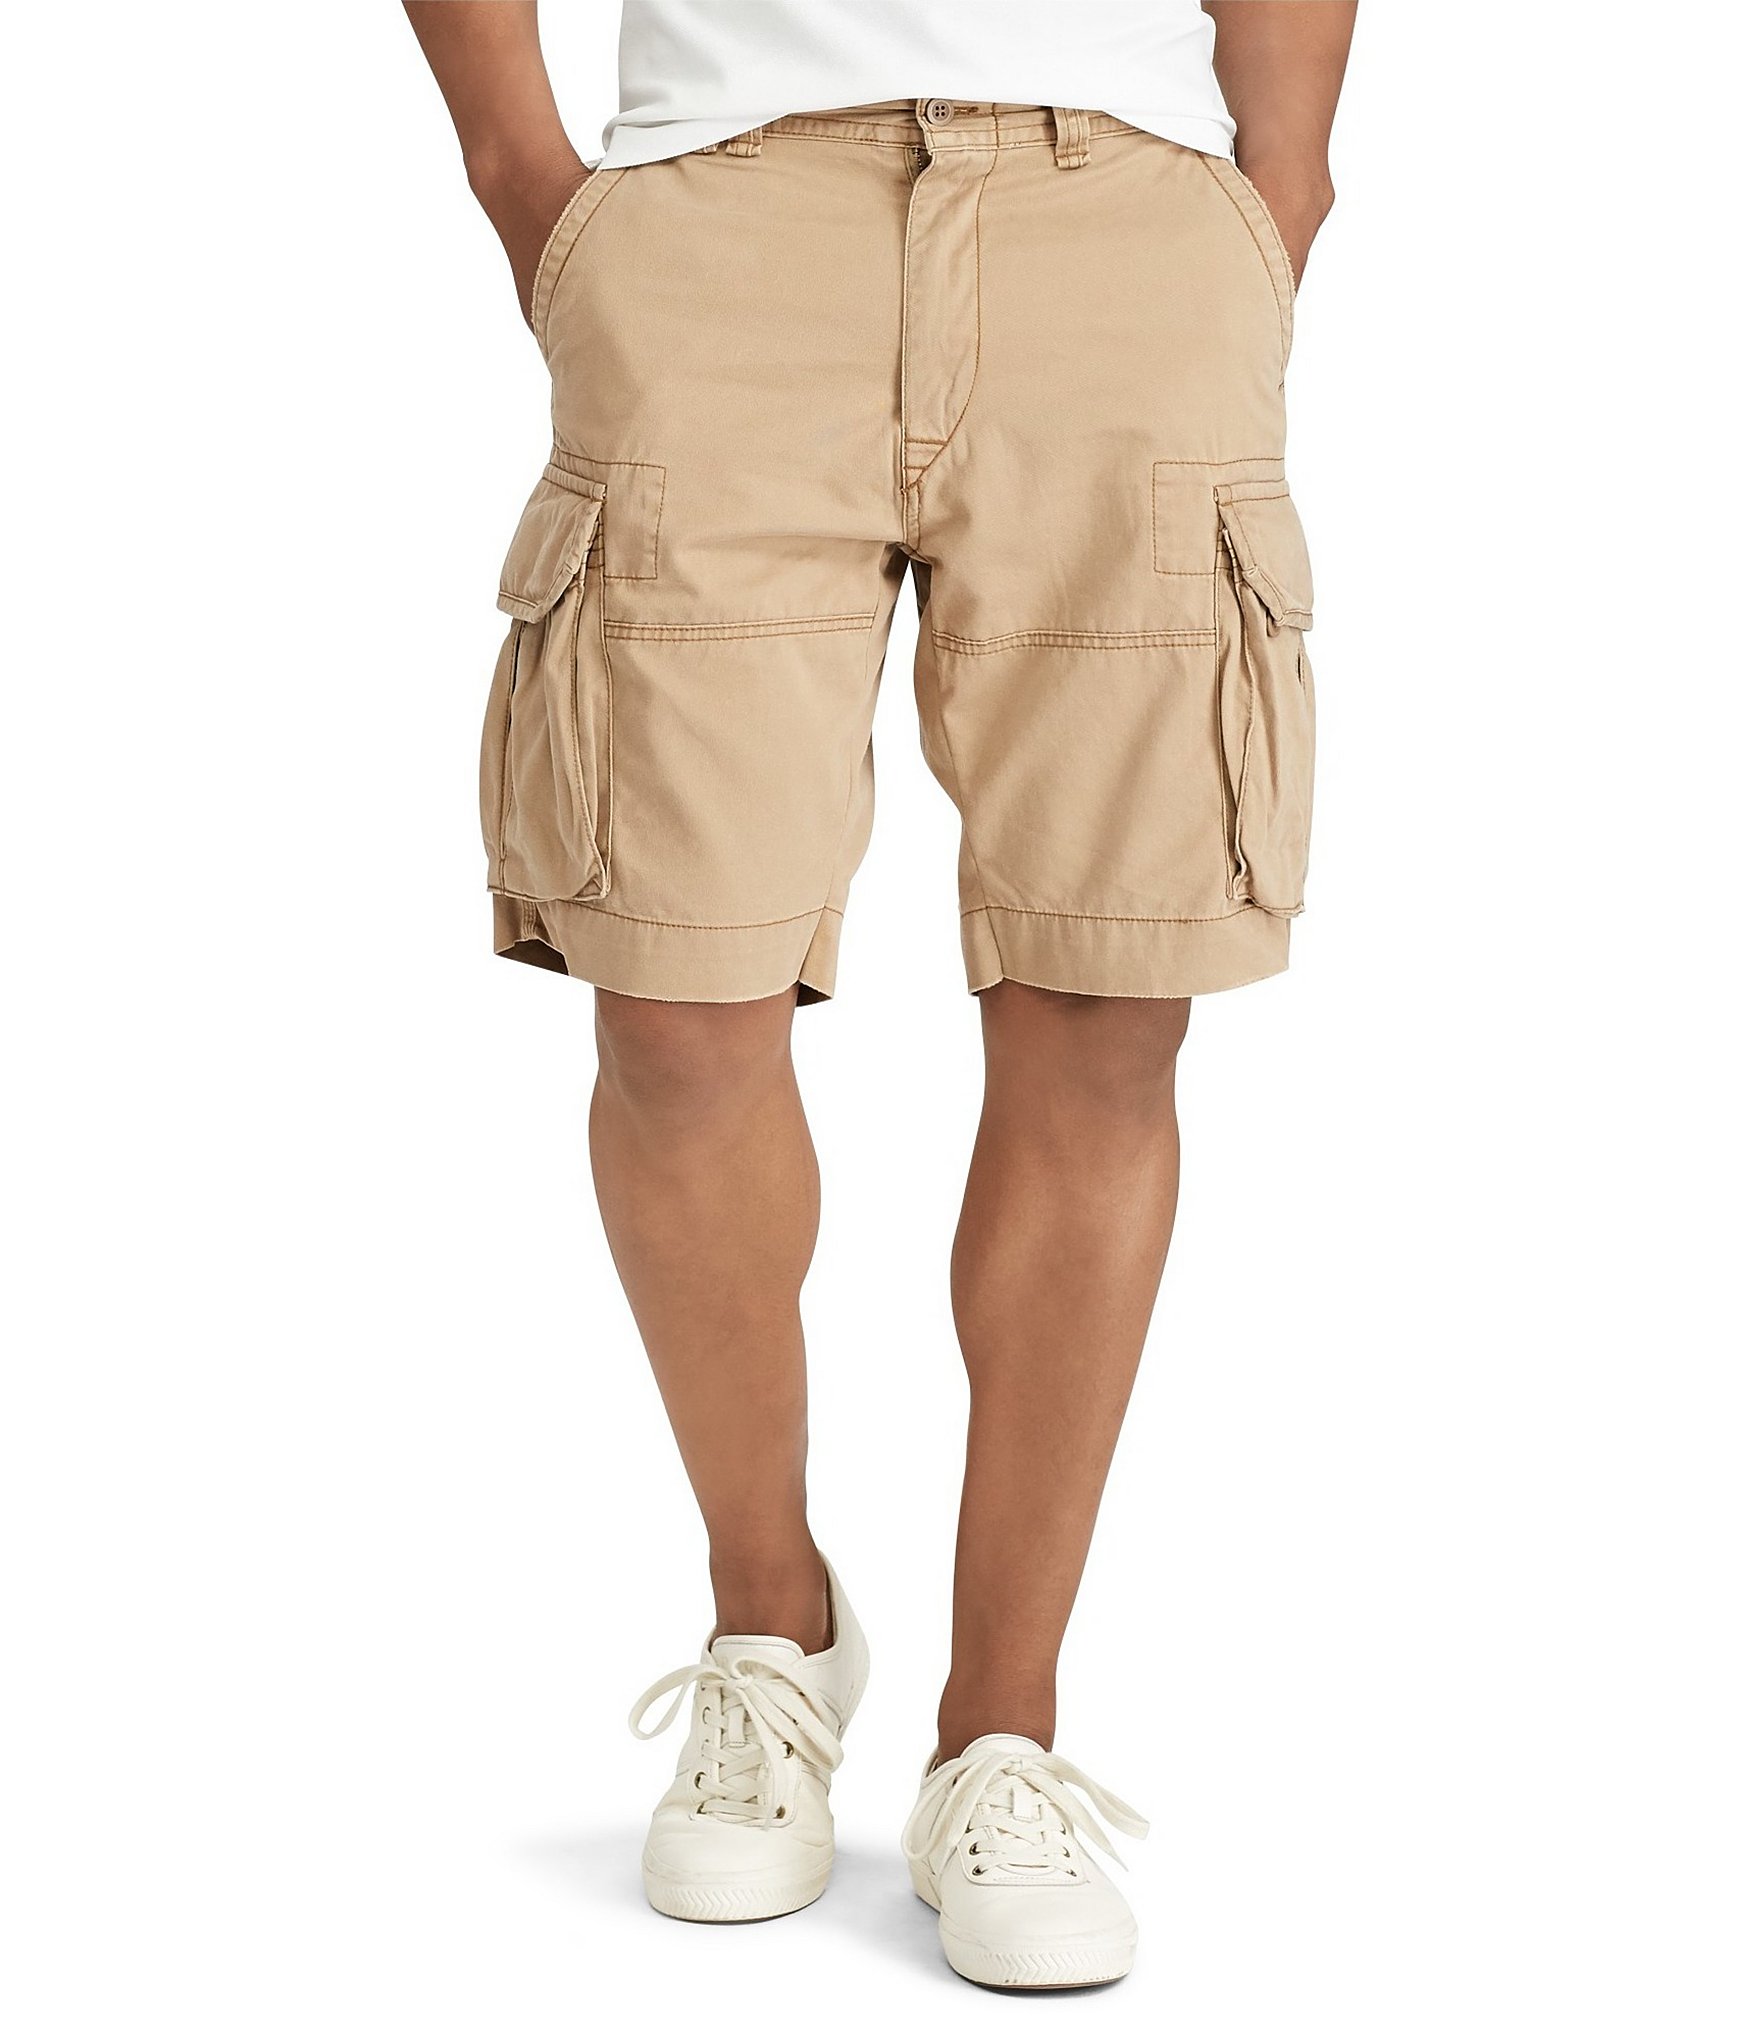 caresse Jonction Galaxie polo cargo shorts Grand chêne Relaxant ange